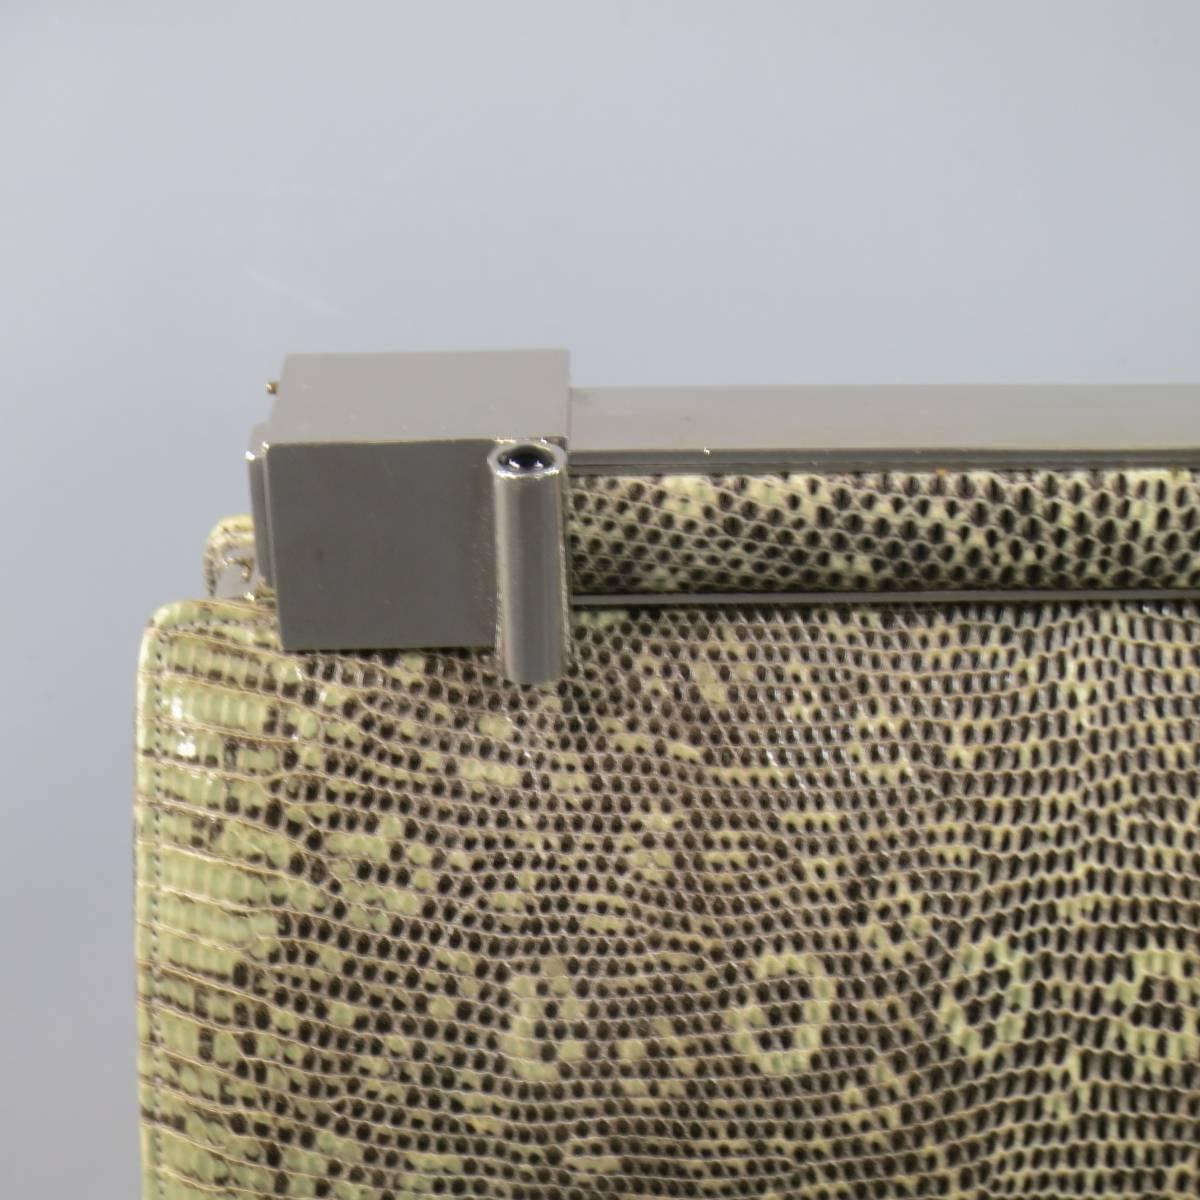 This gorgeous JUDITH LEIBER handbag comes in a light green snakeskin leather and features a structured shape, pleated side, and geometric silver tone metal clasp closure and includes a detachable shoulder strap, coin purse, and mirror. Wear on